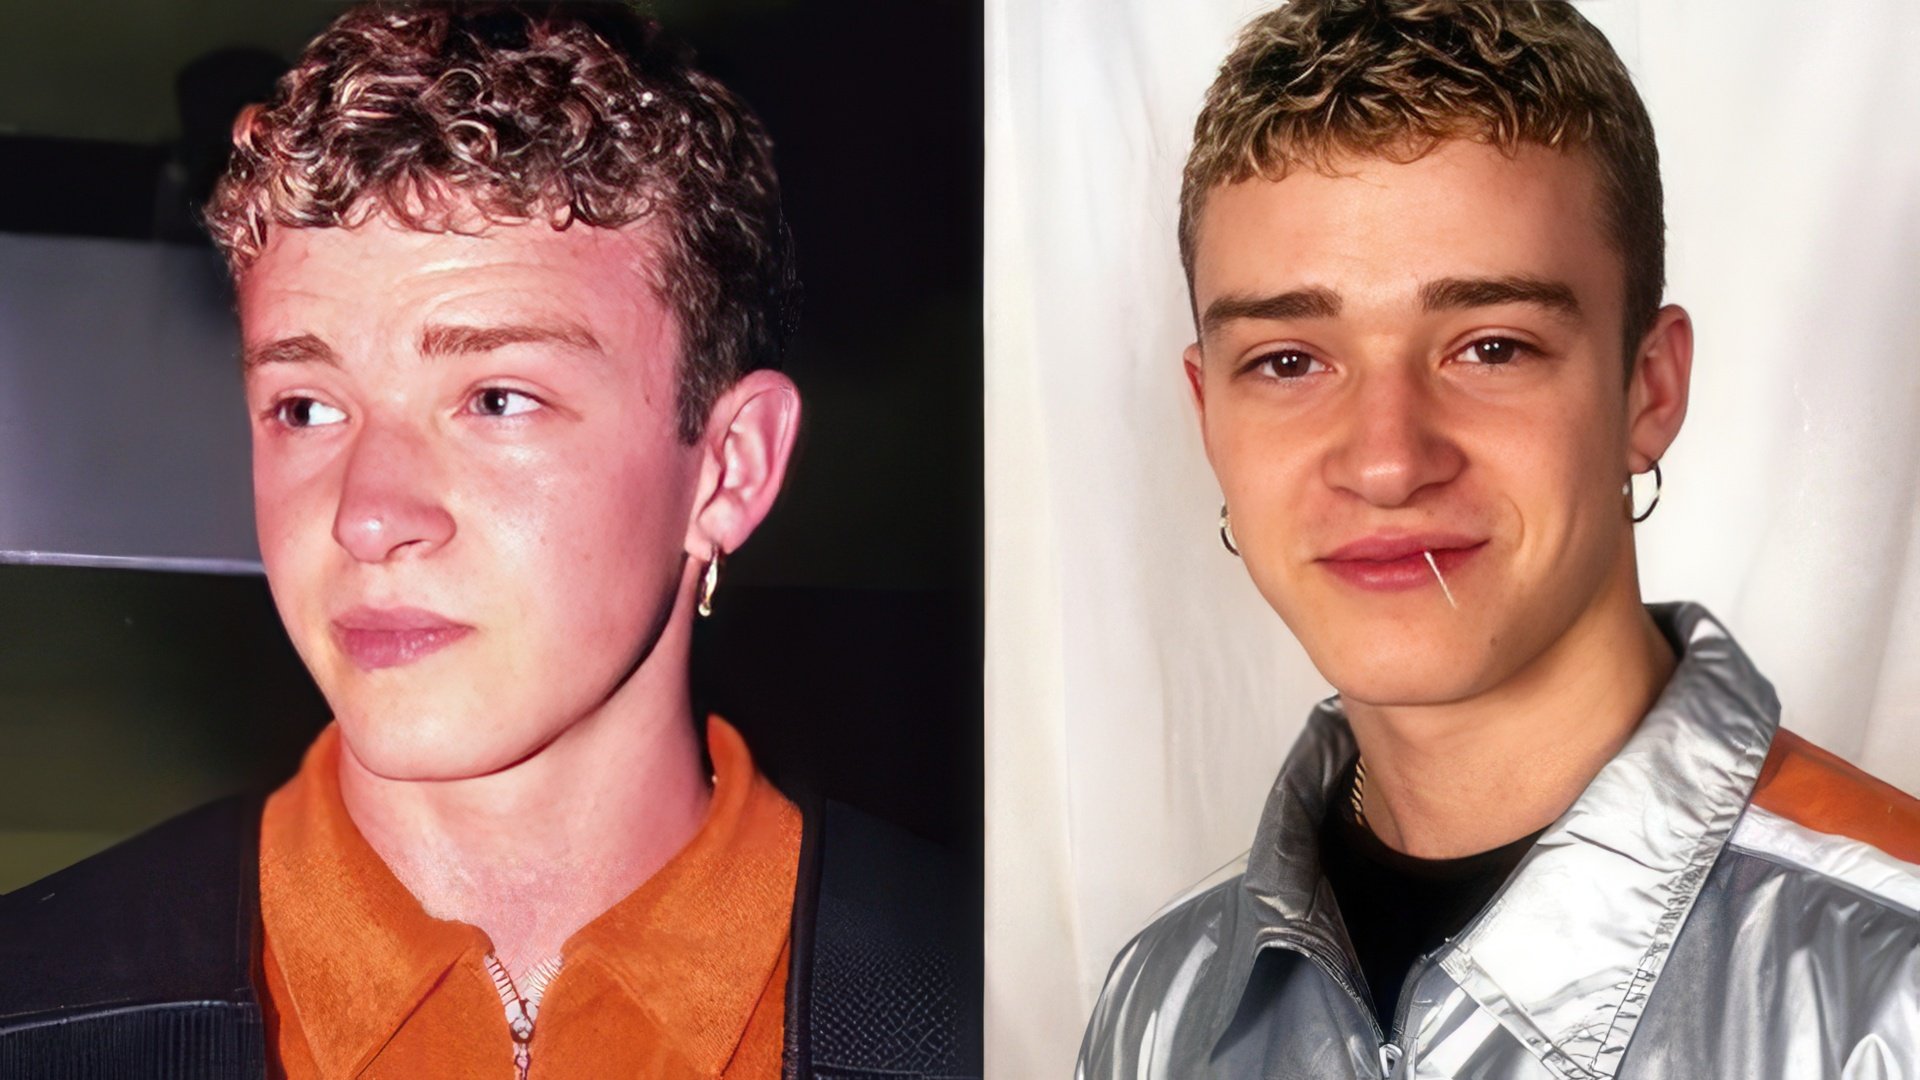 Justin Timberlake in his youth